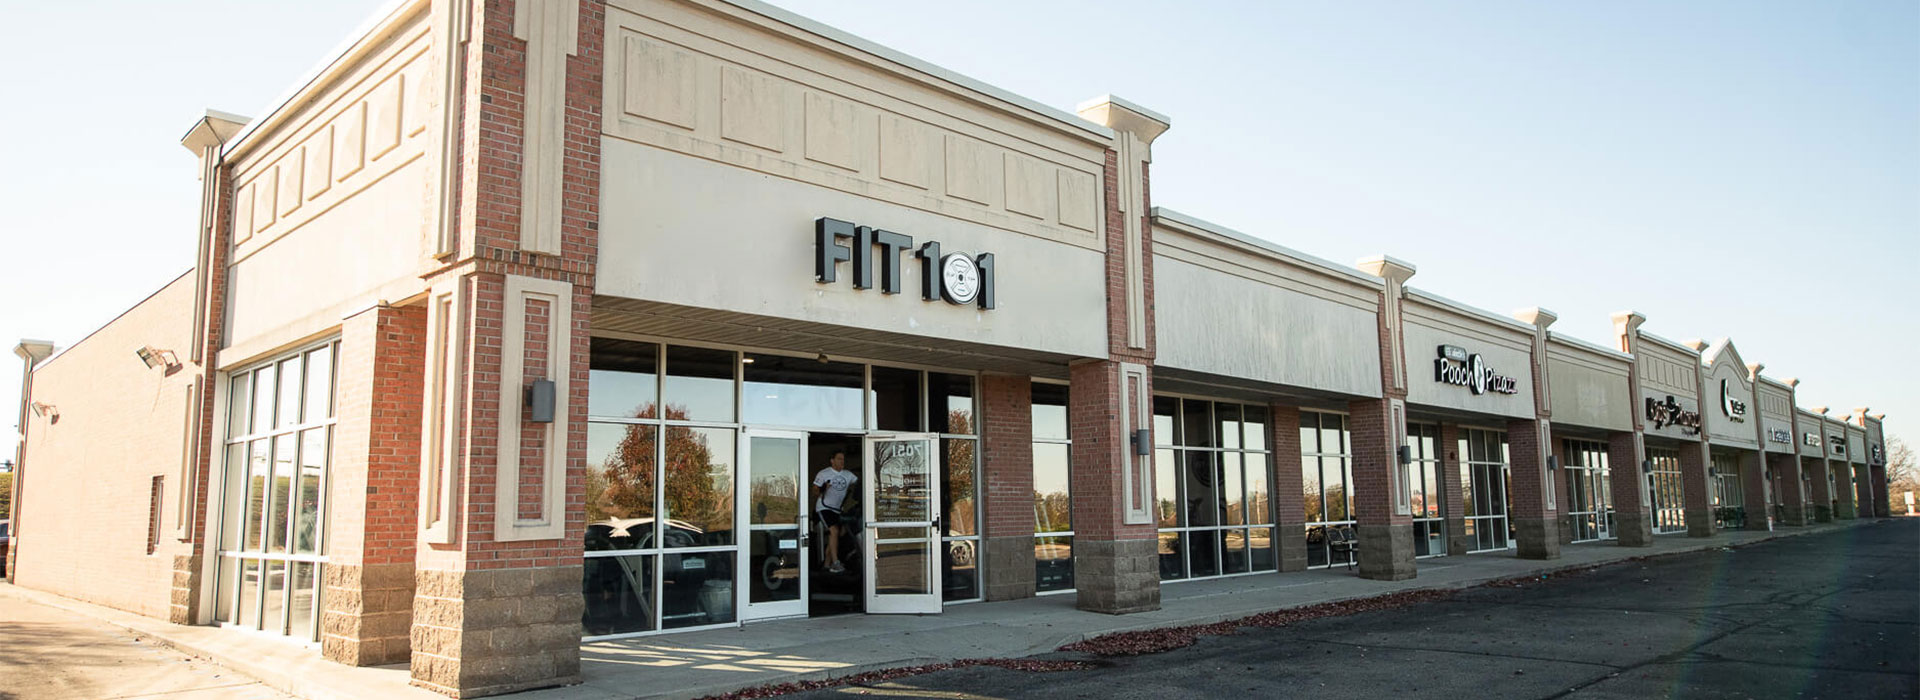 A Gym In West Chester That Can Help With Weight Loss & Dieting